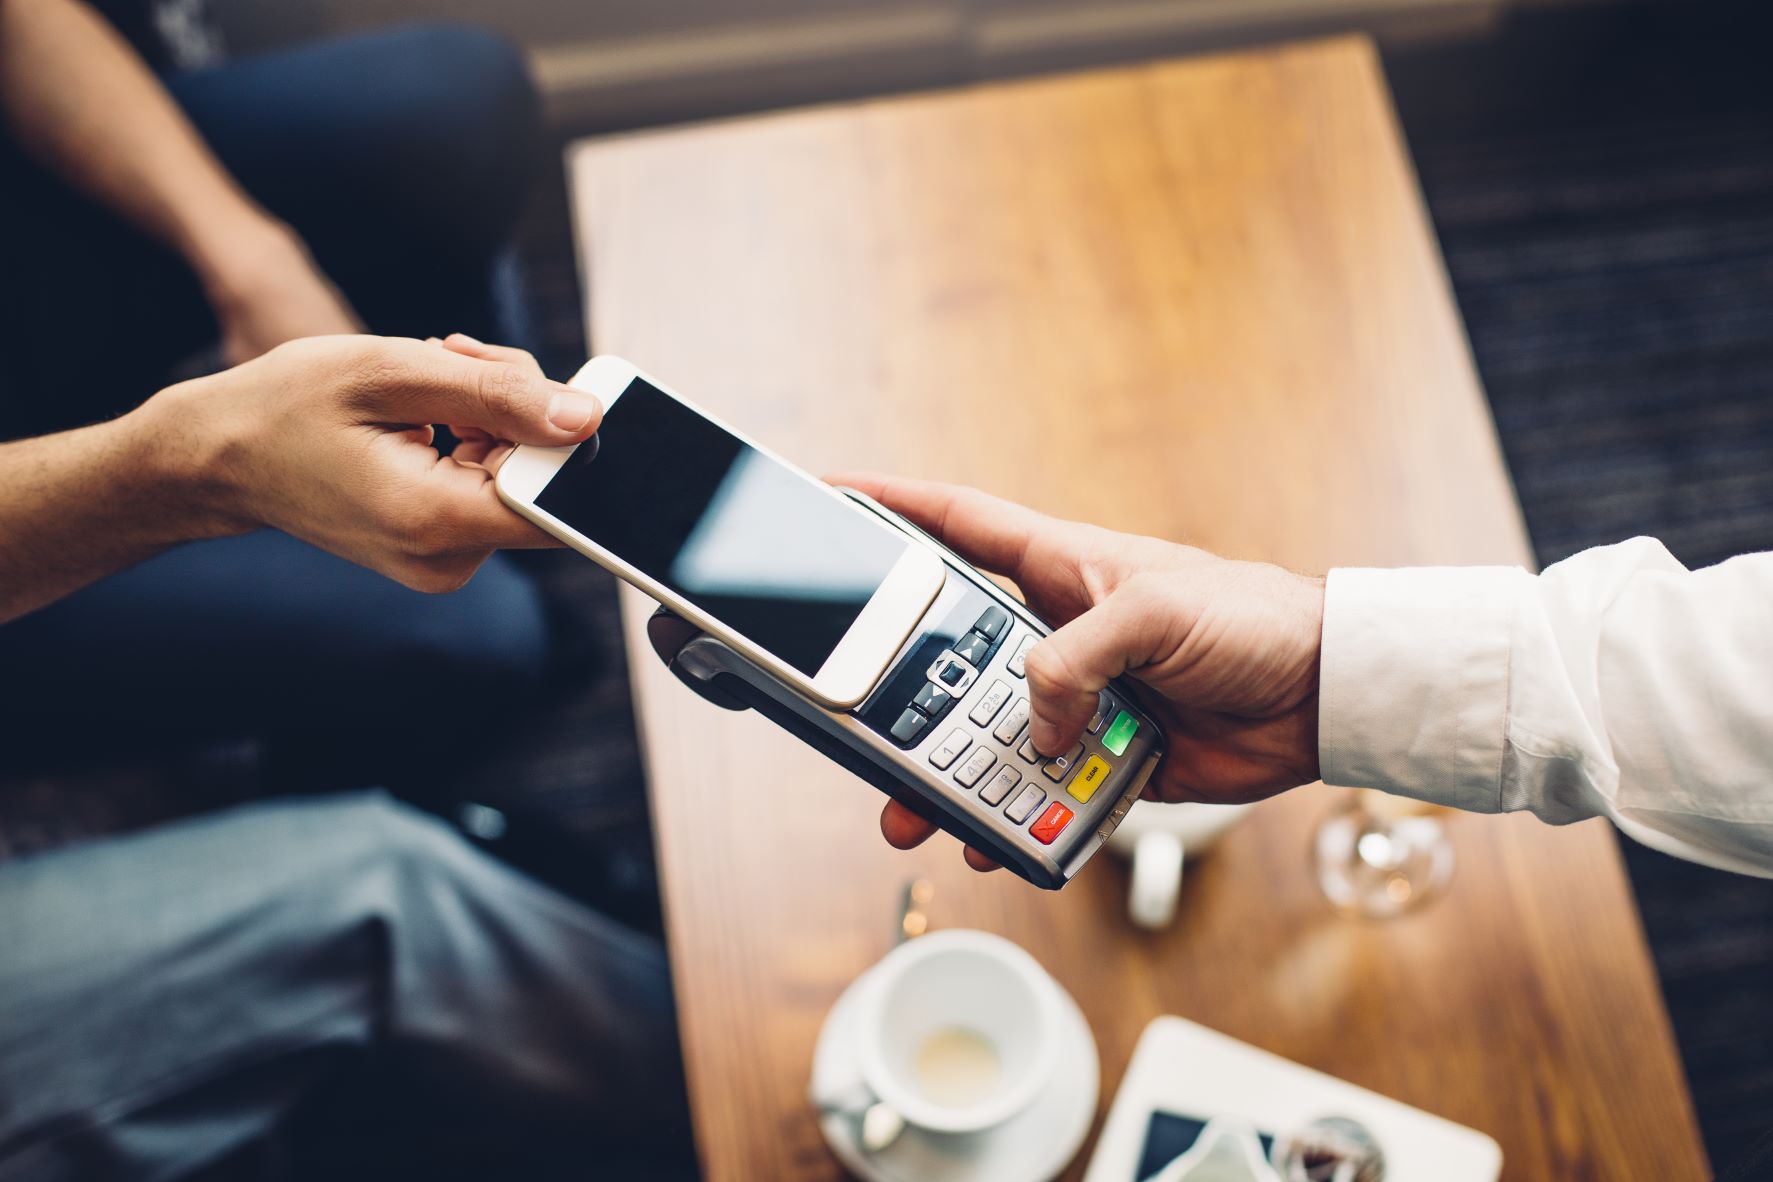 Top 5 payments trends to expect in 2022